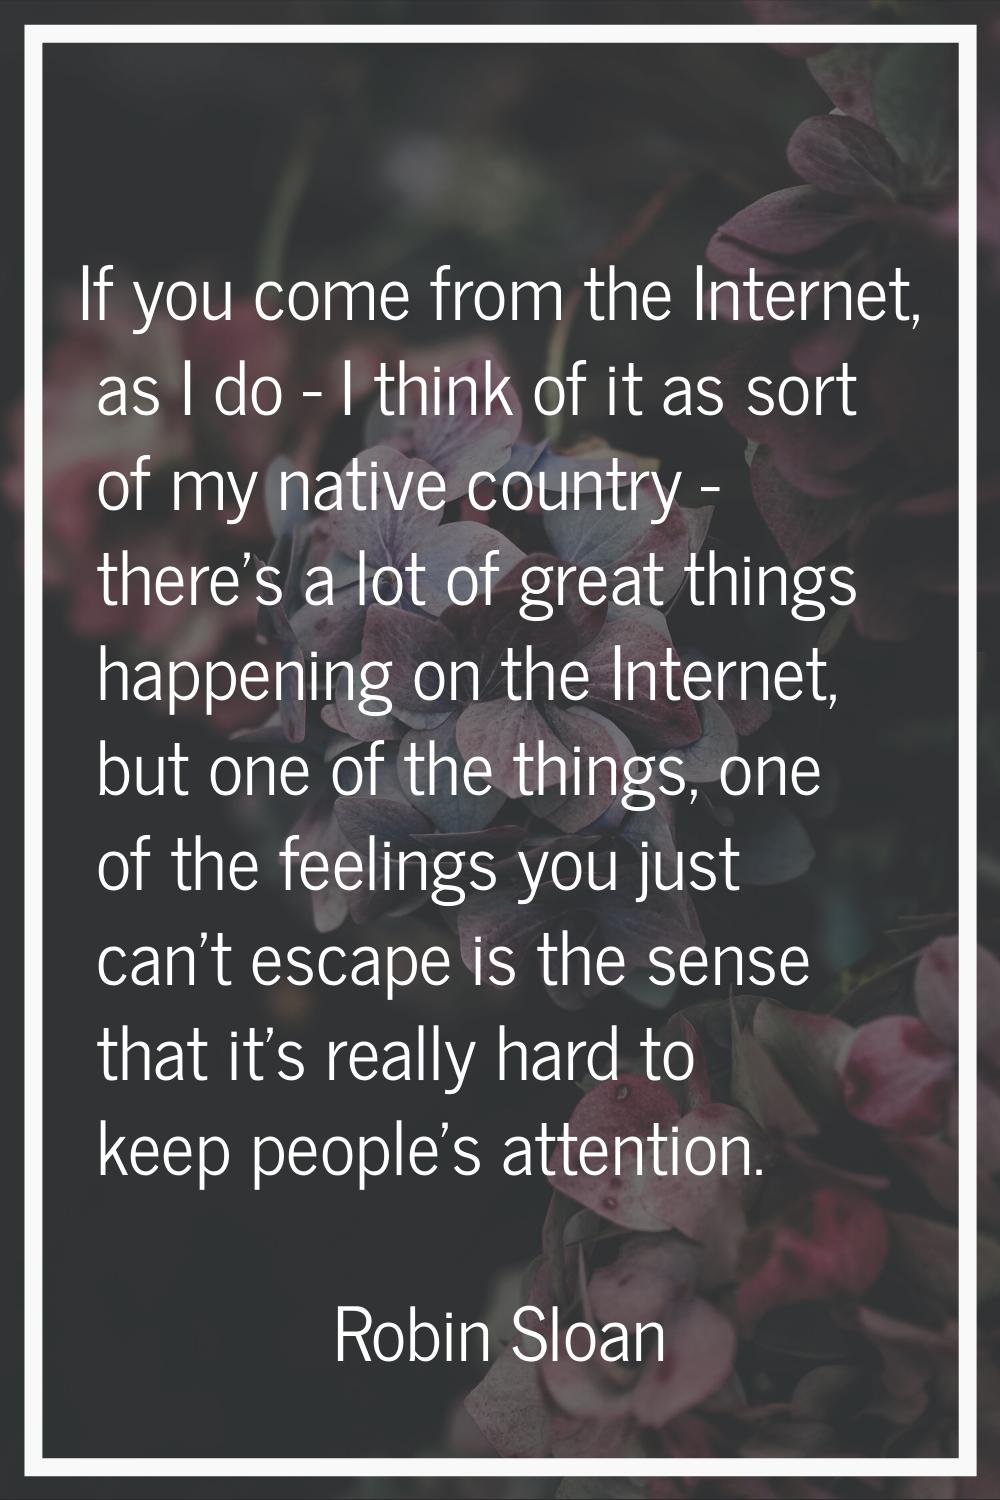 If you come from the Internet, as I do - I think of it as sort of my native country - there's a lot